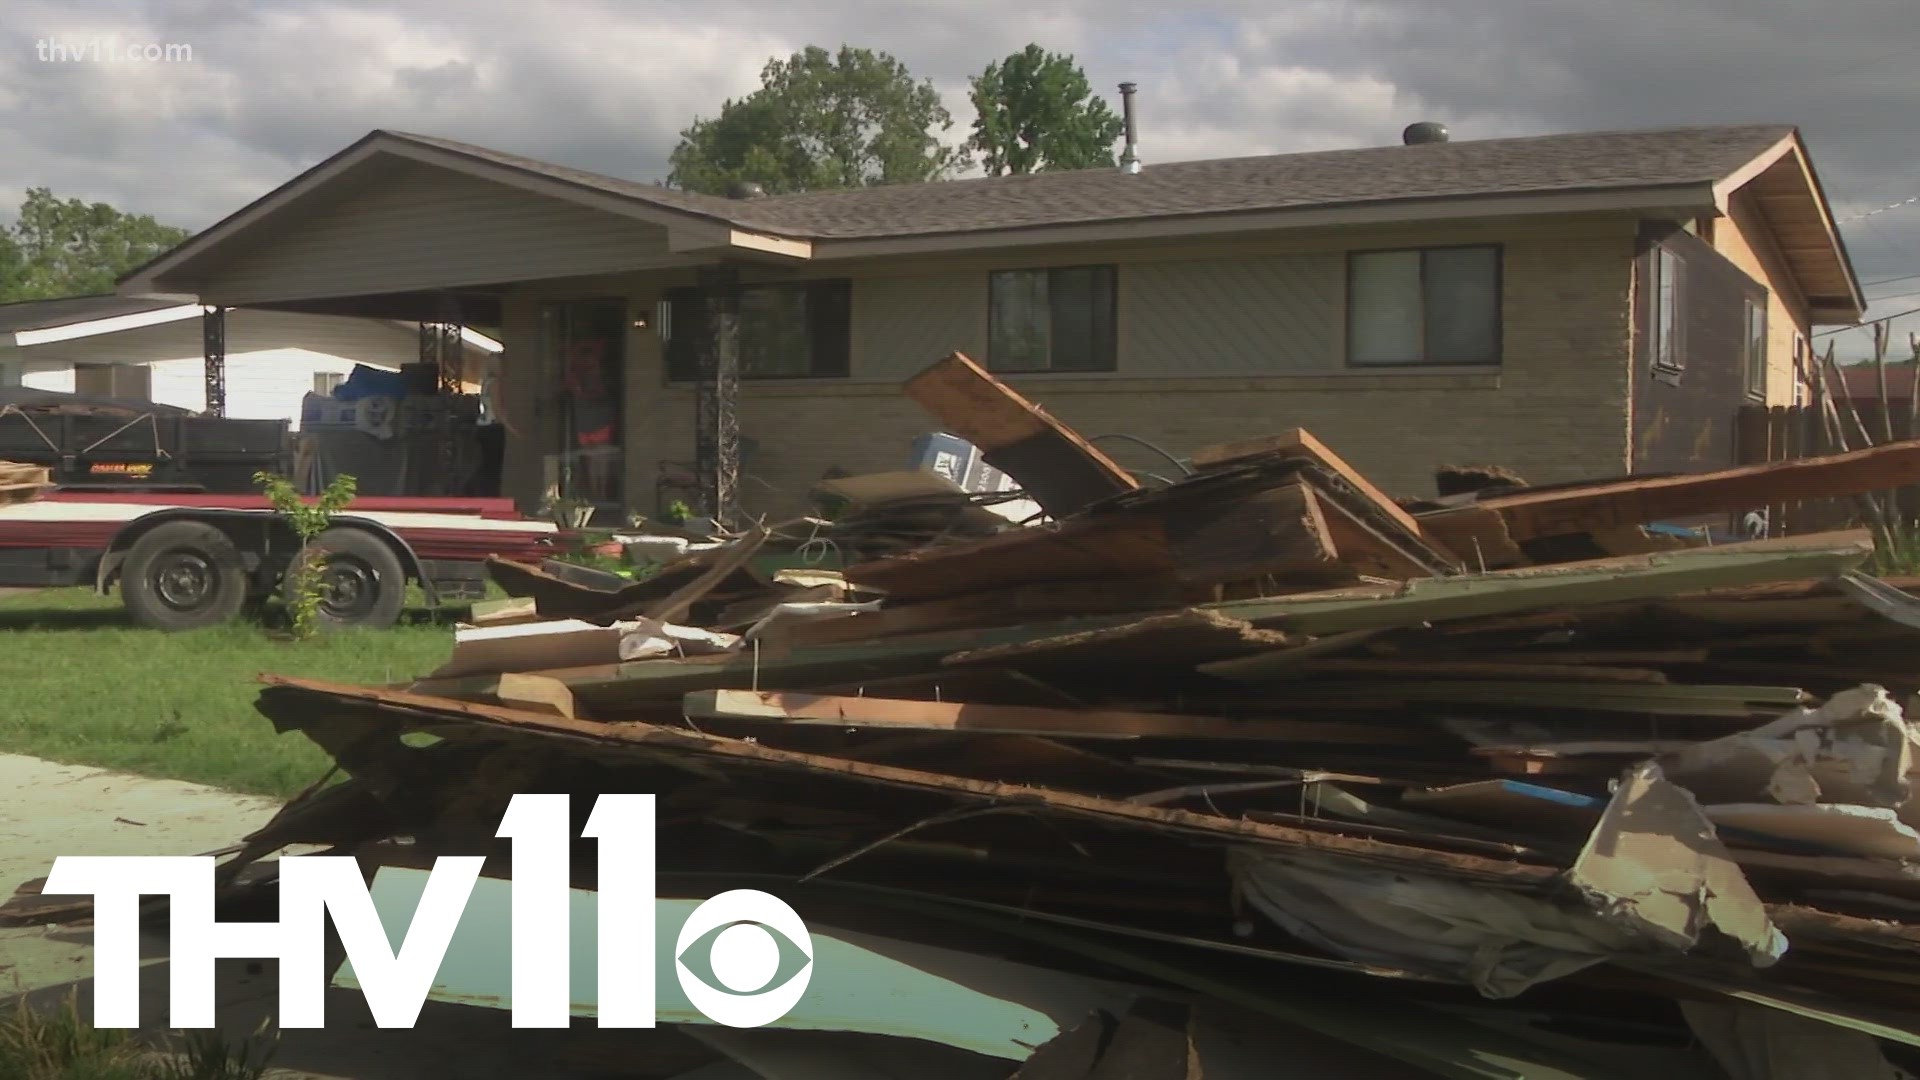 North Little Rock has announced that people should prepare for tornado debris removal in the city to end later this month.